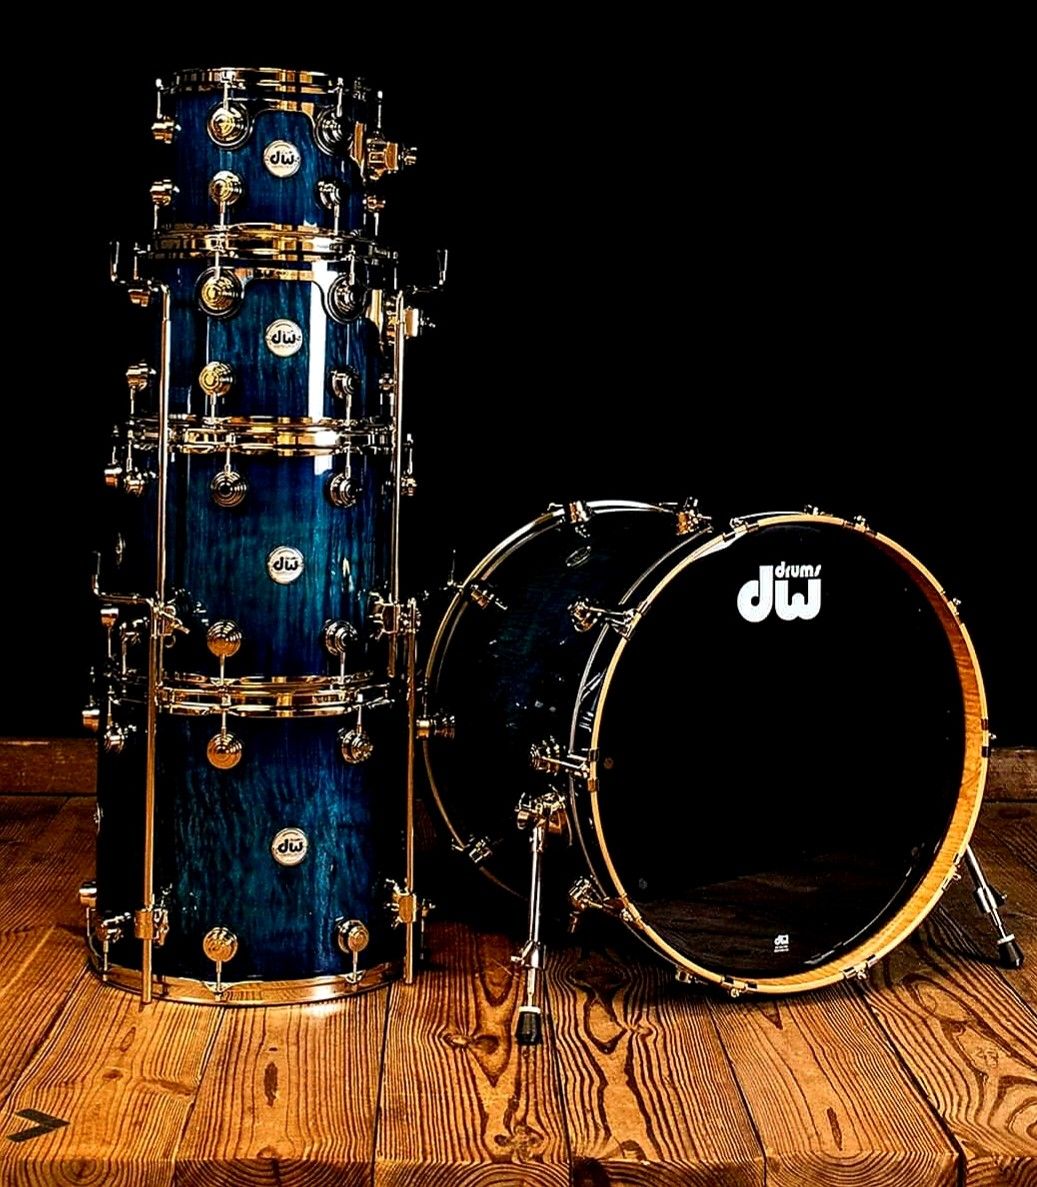 Pin by terry nugent on dw drums drums wallpaper percussion drums drum kits